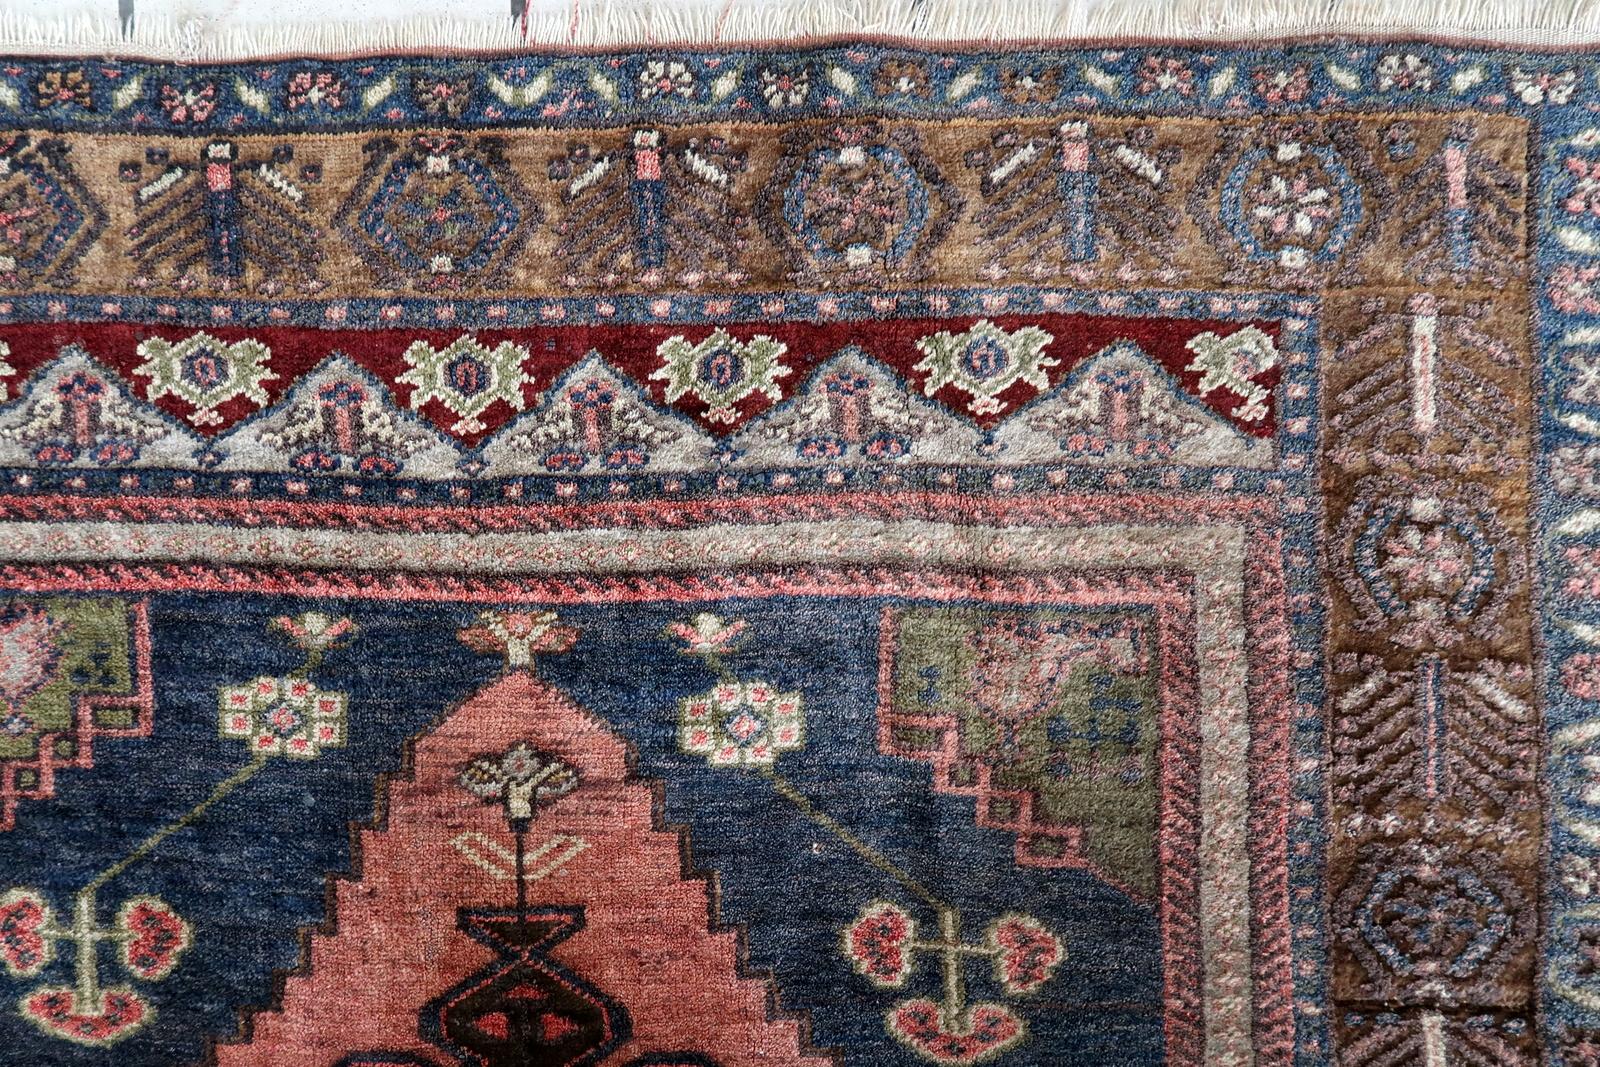 Enhance your living space with this Handmade Vintage Turkish Anatolian Rug. Crafted in the 1970s, this rug measures 3.7' x 5.6' (113cm x 173cm) and is in original good condition. Made from high-quality wool, it hails from Turkey, featuring the